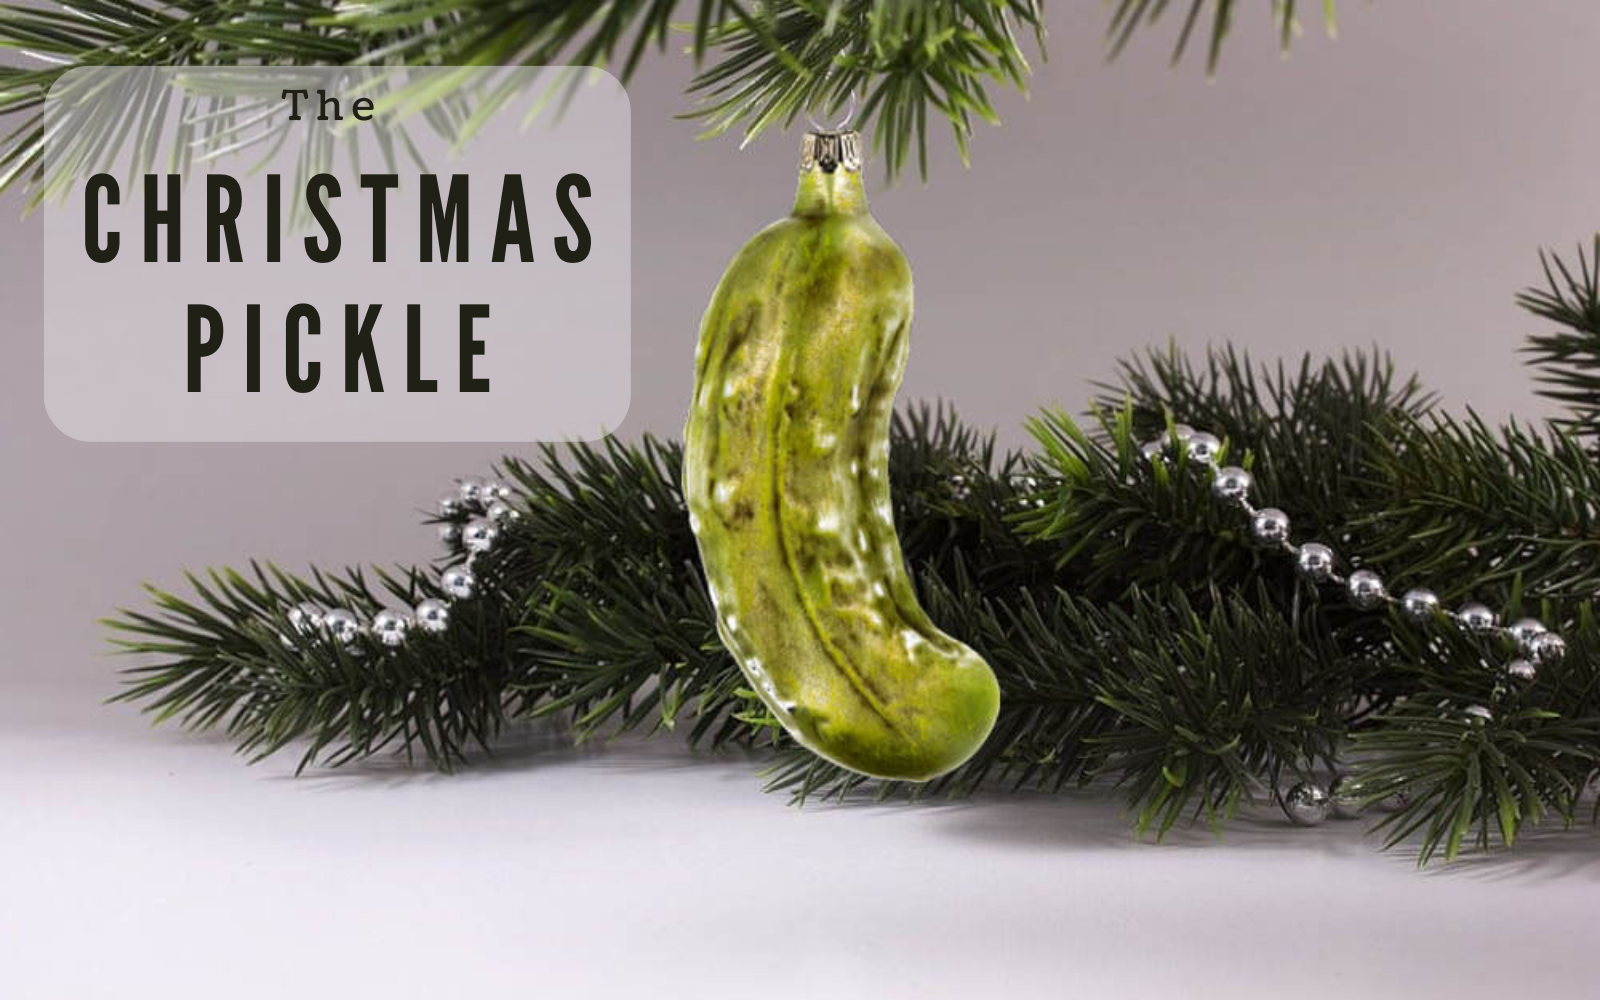 THE TRADITION OF THE CHRISTMAS PICKLE